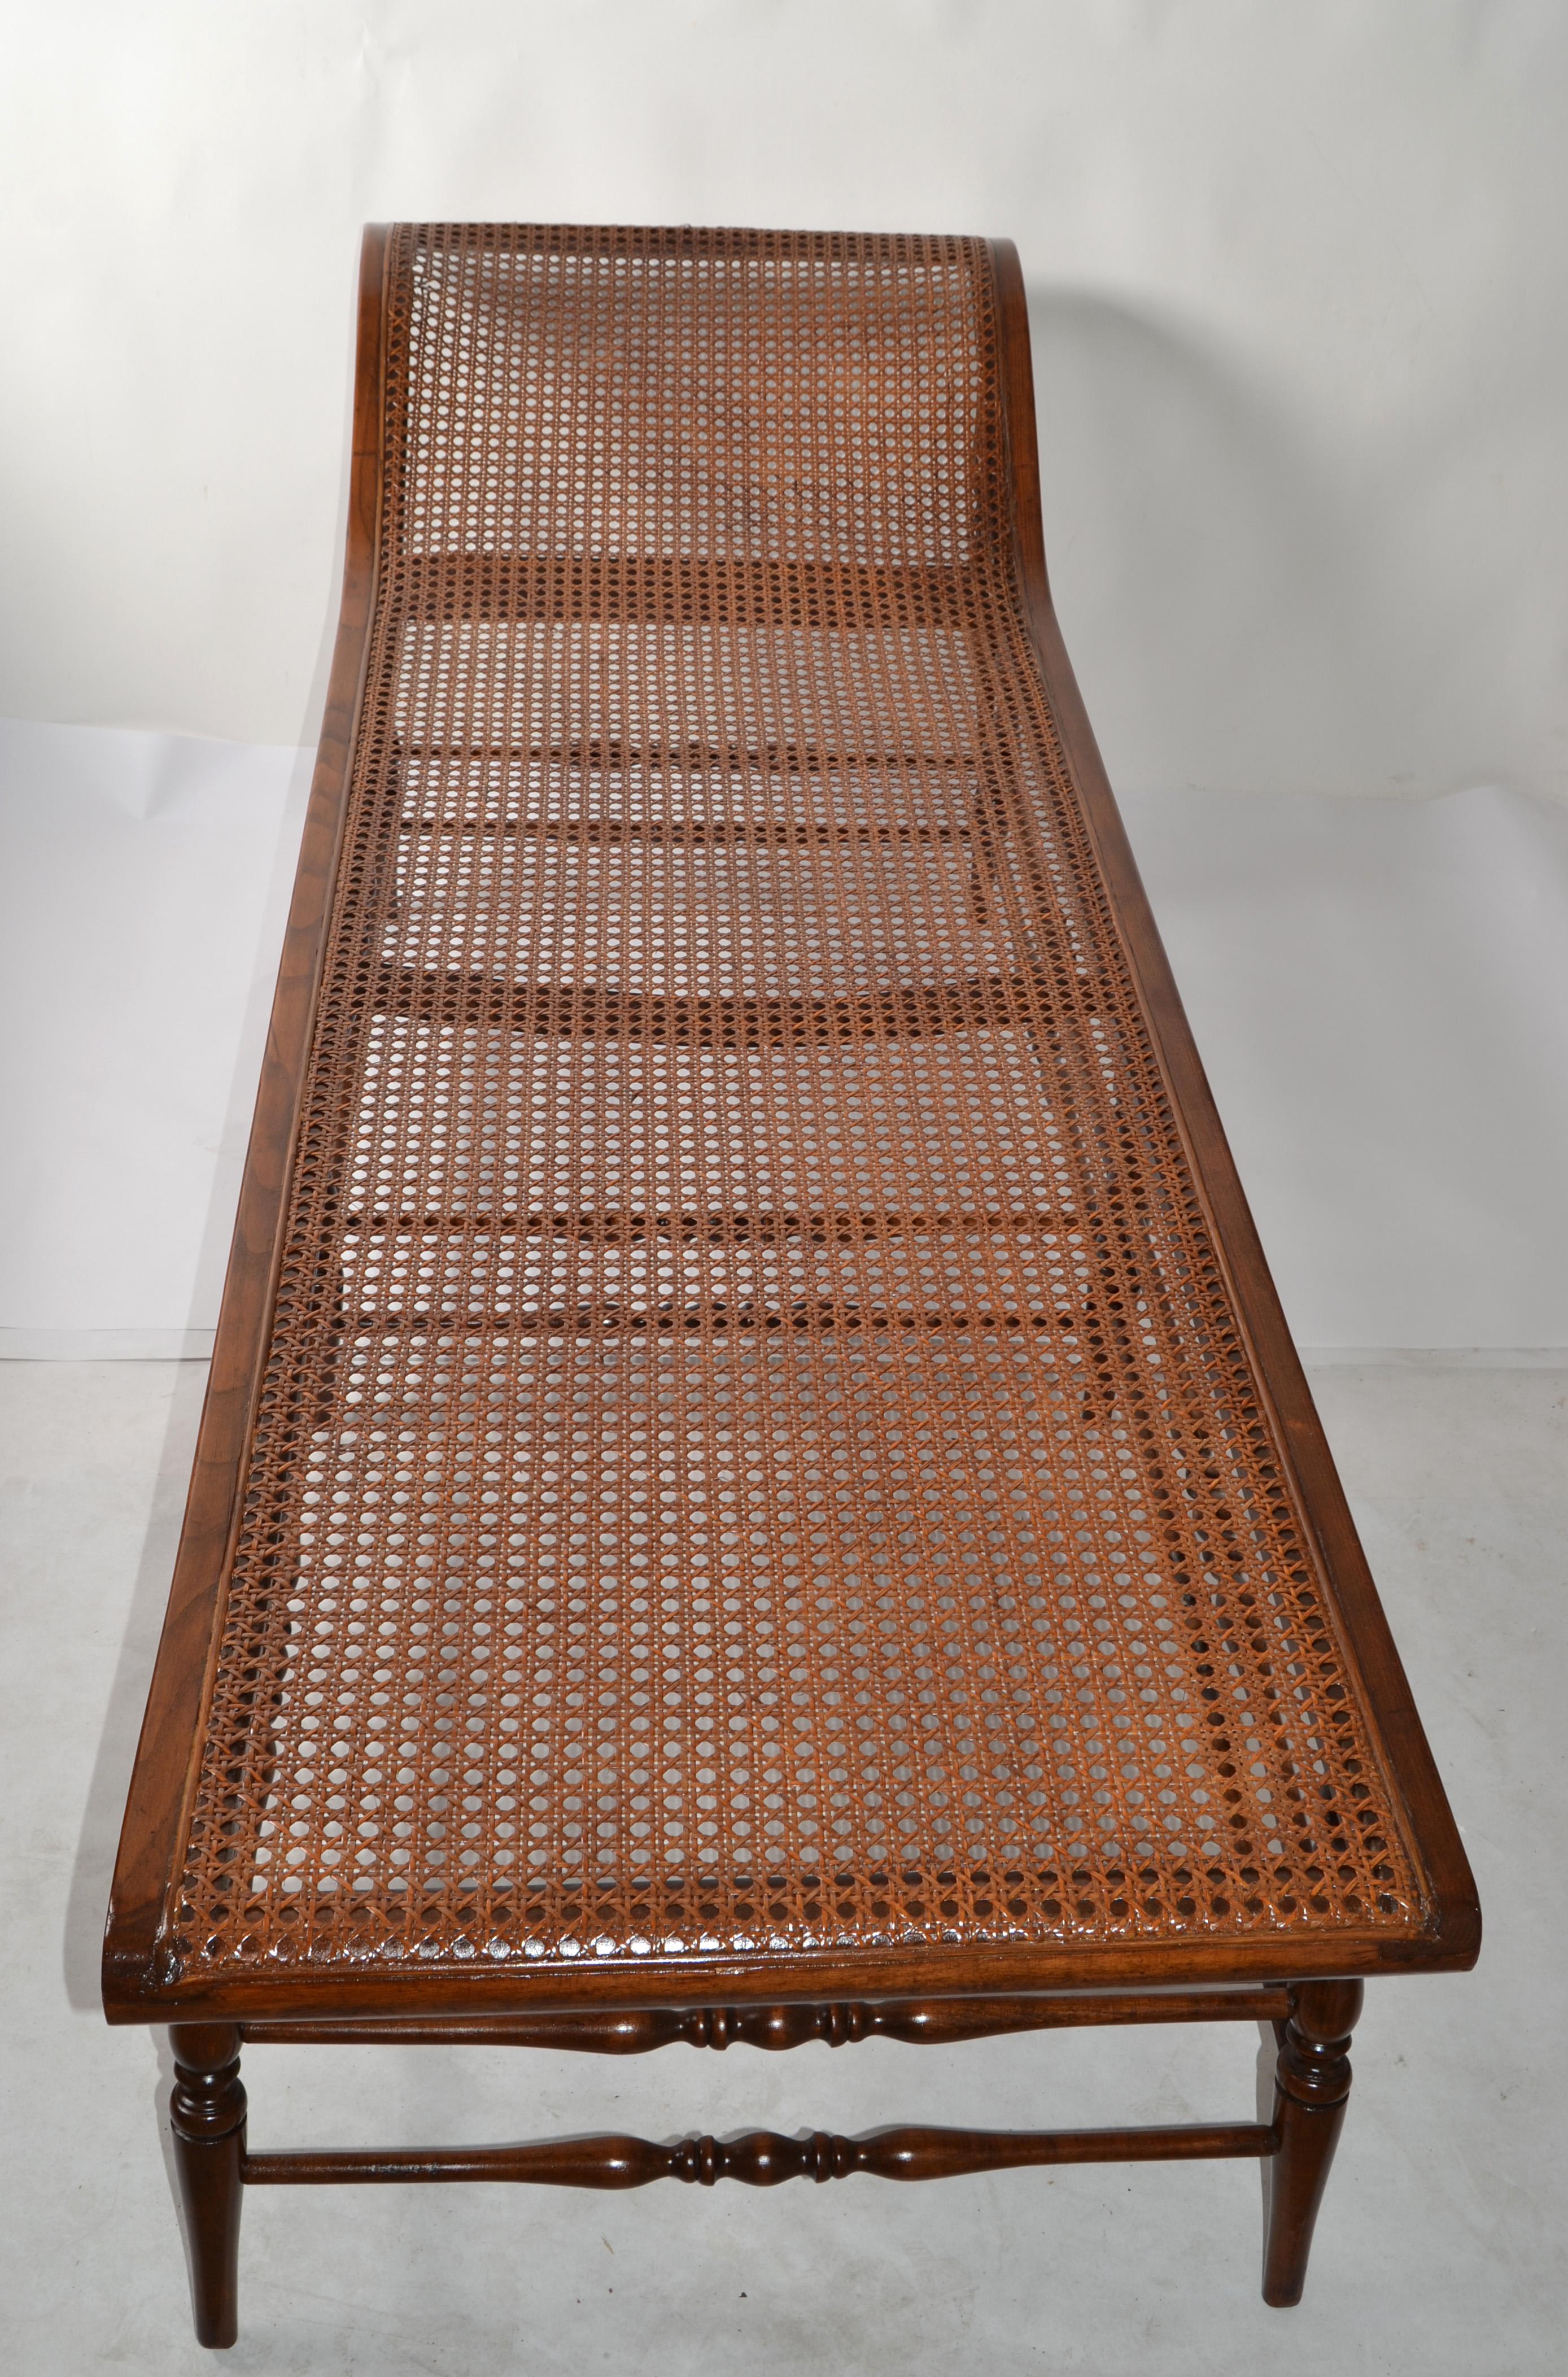 20th Century British Colonial Handwoven Cane Turned Wood Spindle Frame Chaise Lounge Daybed For Sale